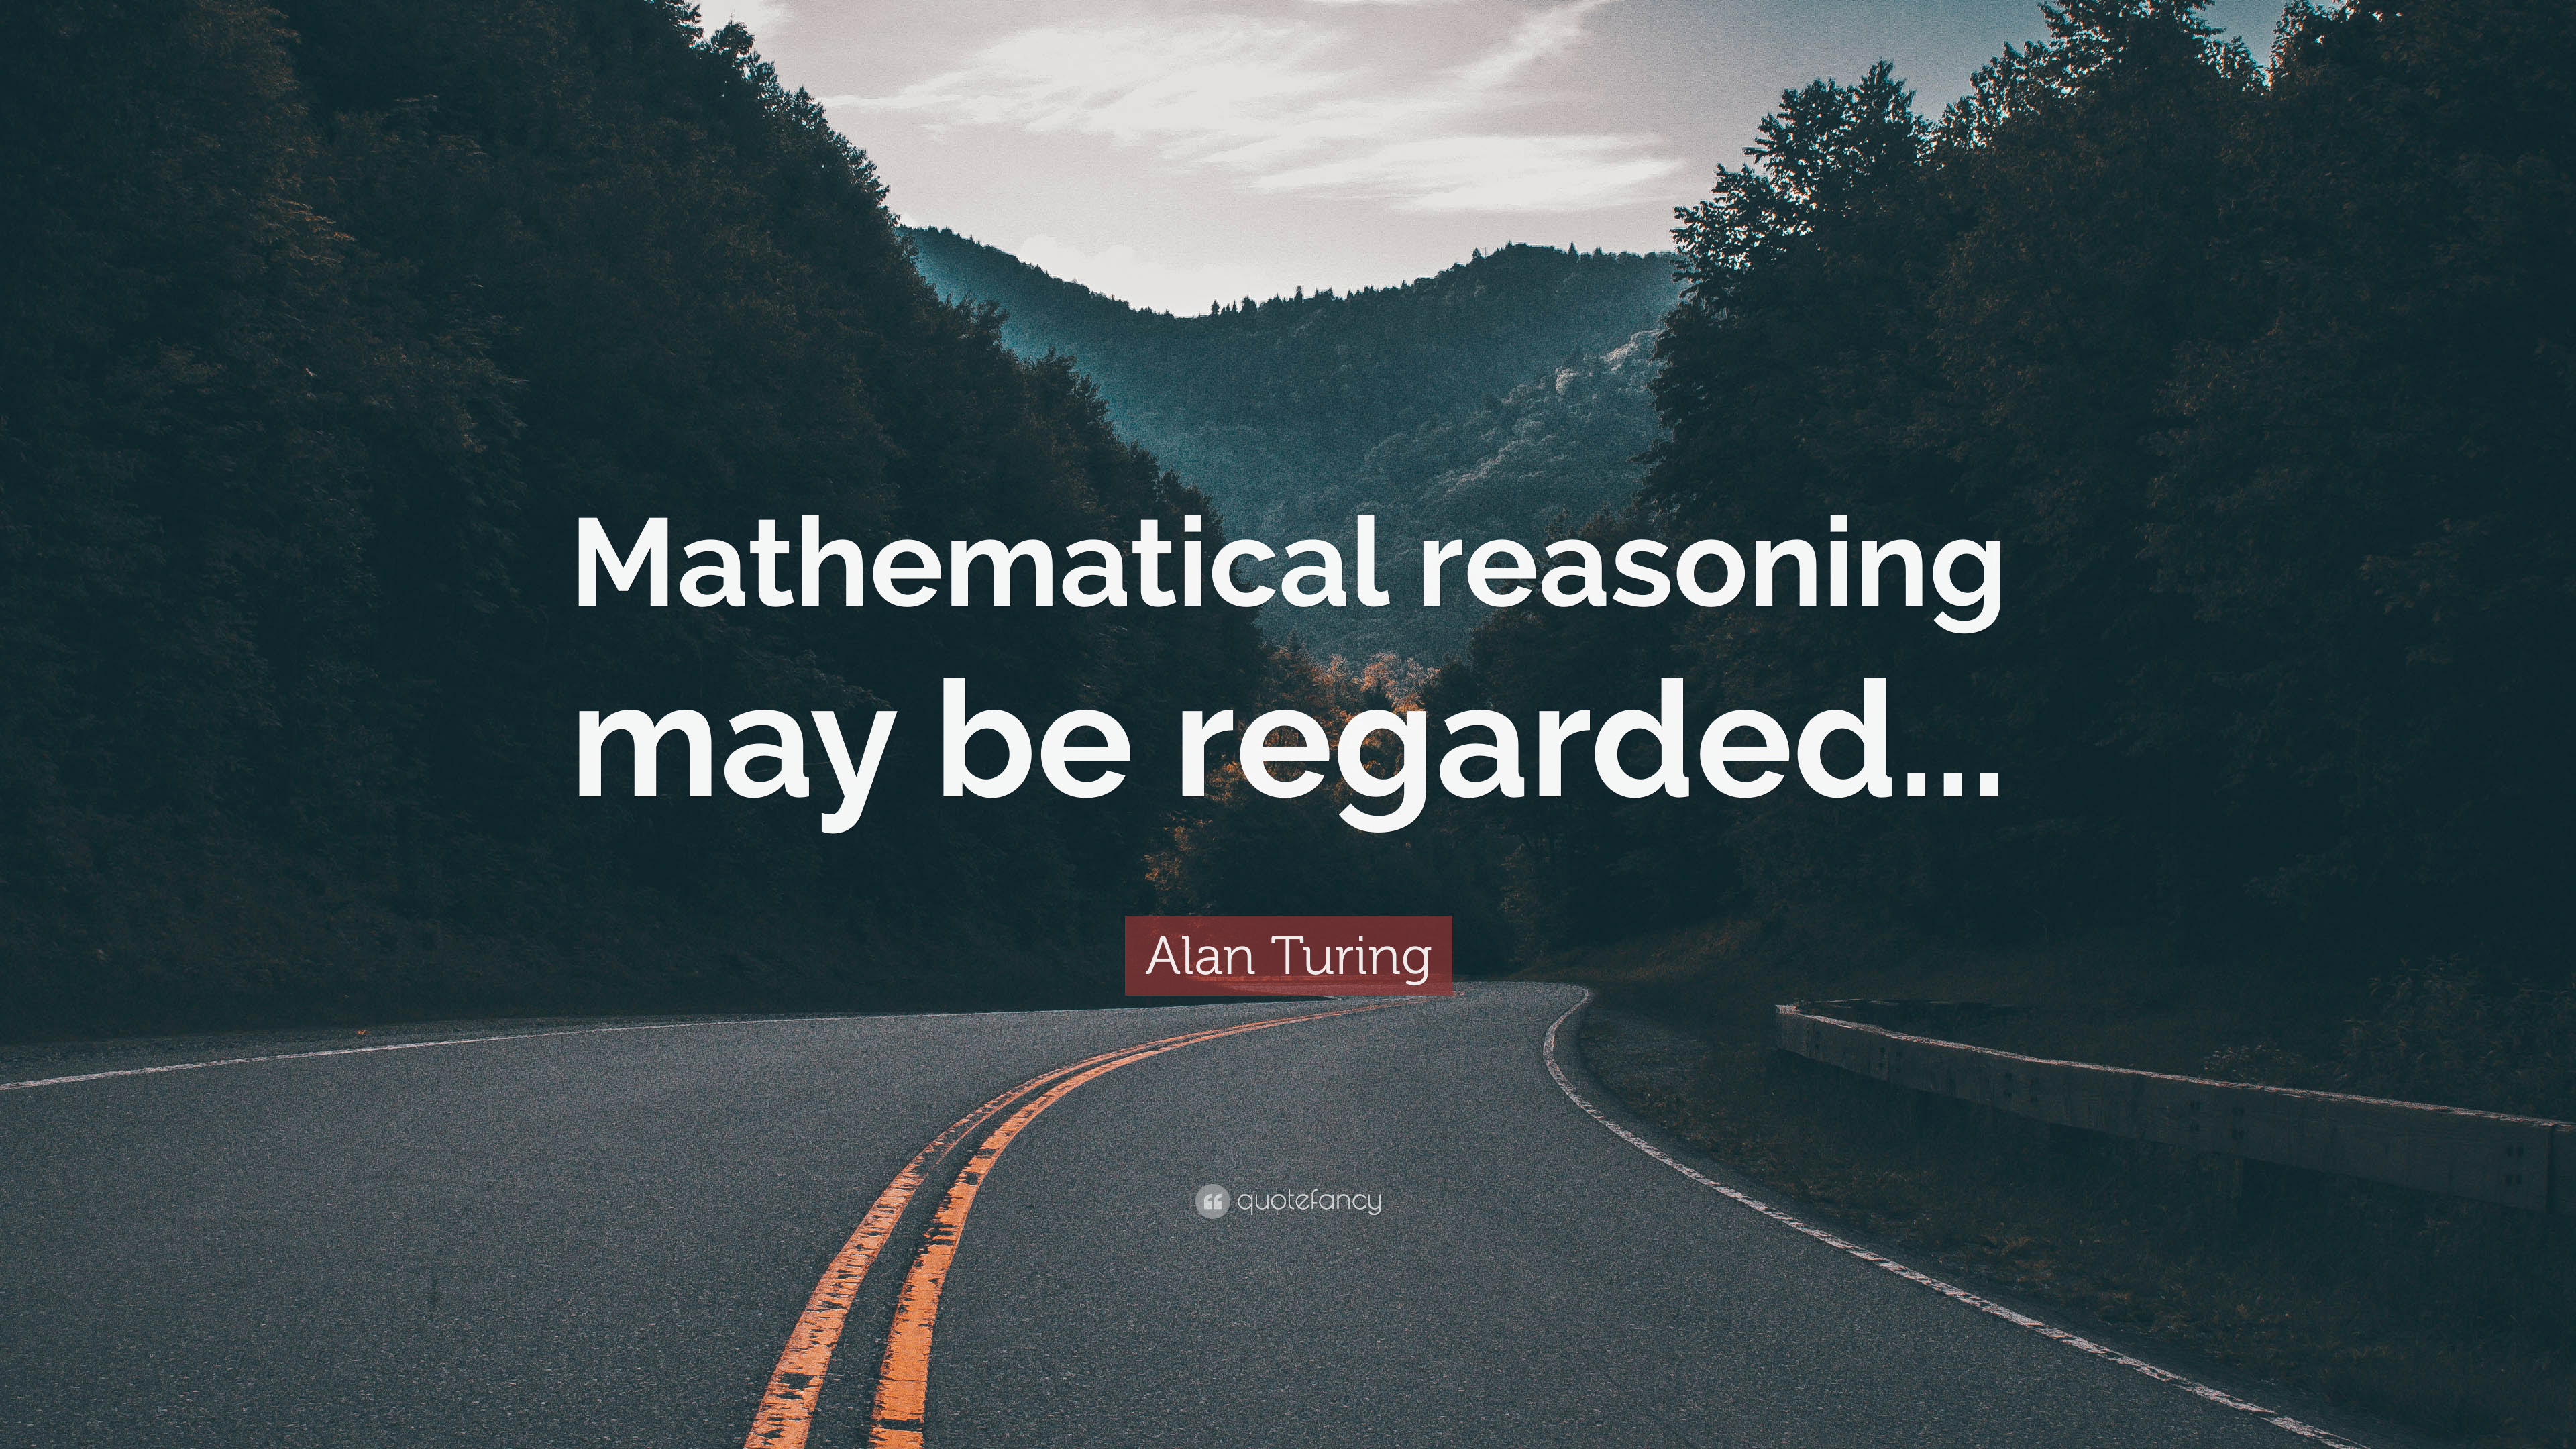 Alan Turing Quote: “Mathematical reasoning may be regarded.” 12